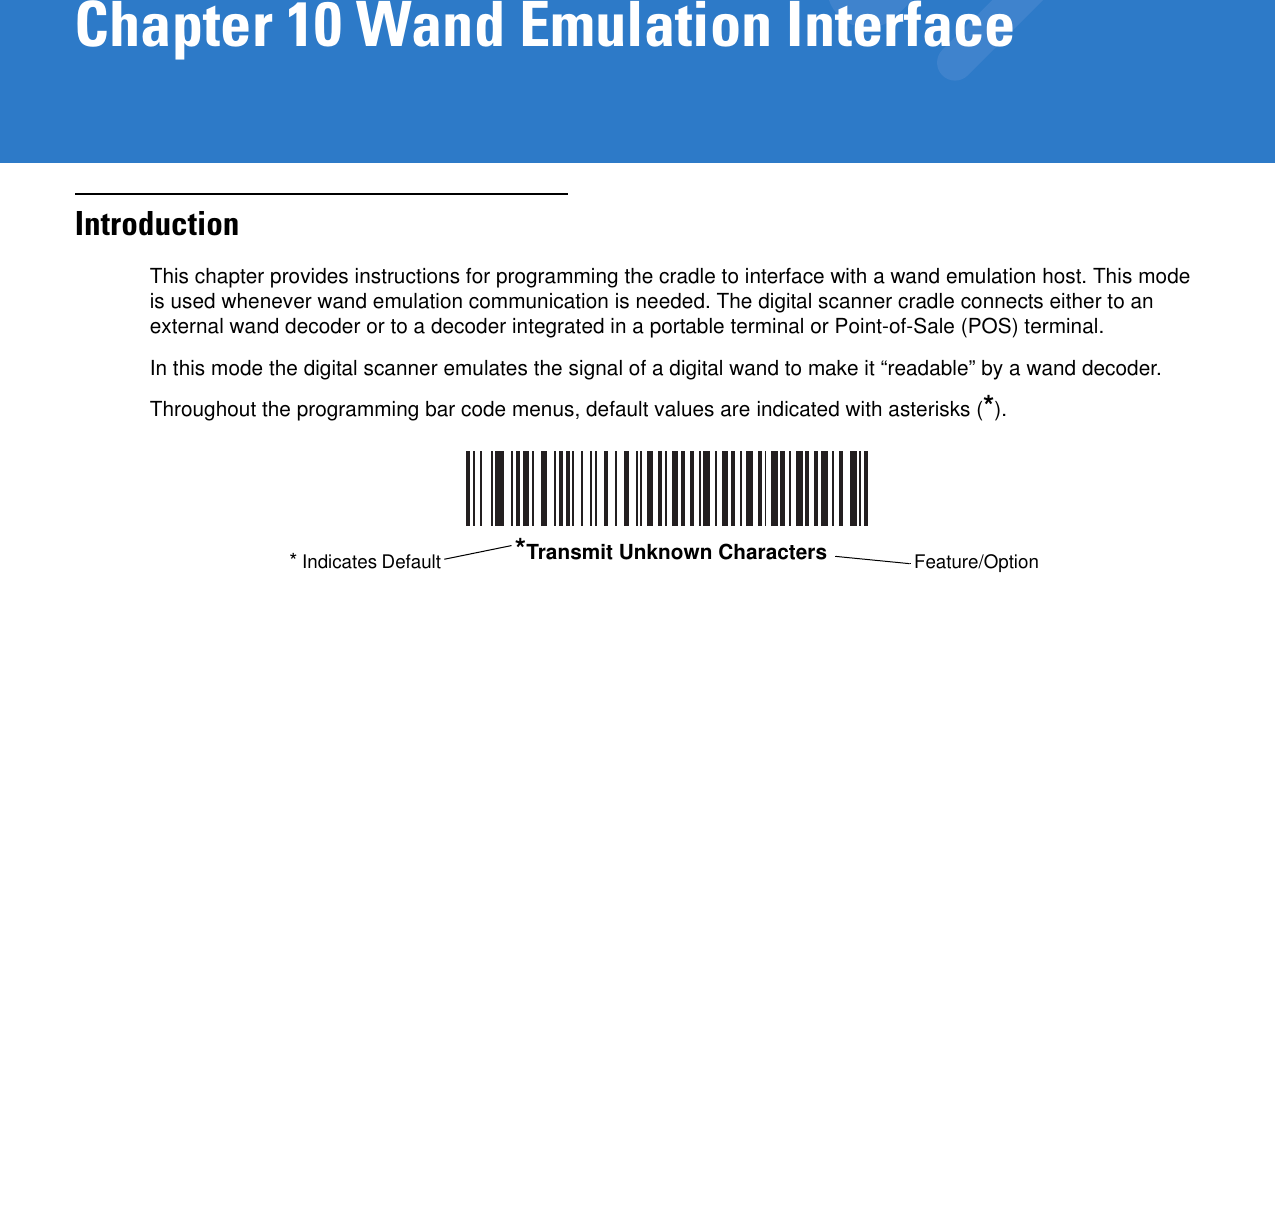 Chapter 10 Wand Emulation InterfaceIntroductionThis chapter provides instructions for programming the cradle to interface with a wand emulation host. This mode is used whenever wand emulation communication is needed. The digital scanner cradle connects either to an external wand decoder or to a decoder integrated in a portable terminal or Point-of-Sale (POS) terminal.In this mode the digital scanner emulates the signal of a digital wand to make it “readable” by a wand decoder.Throughout the programming bar code menus, default values are indicated with asterisks (*).*Transmit Unknown Characters Feature/Option* Indicates Default